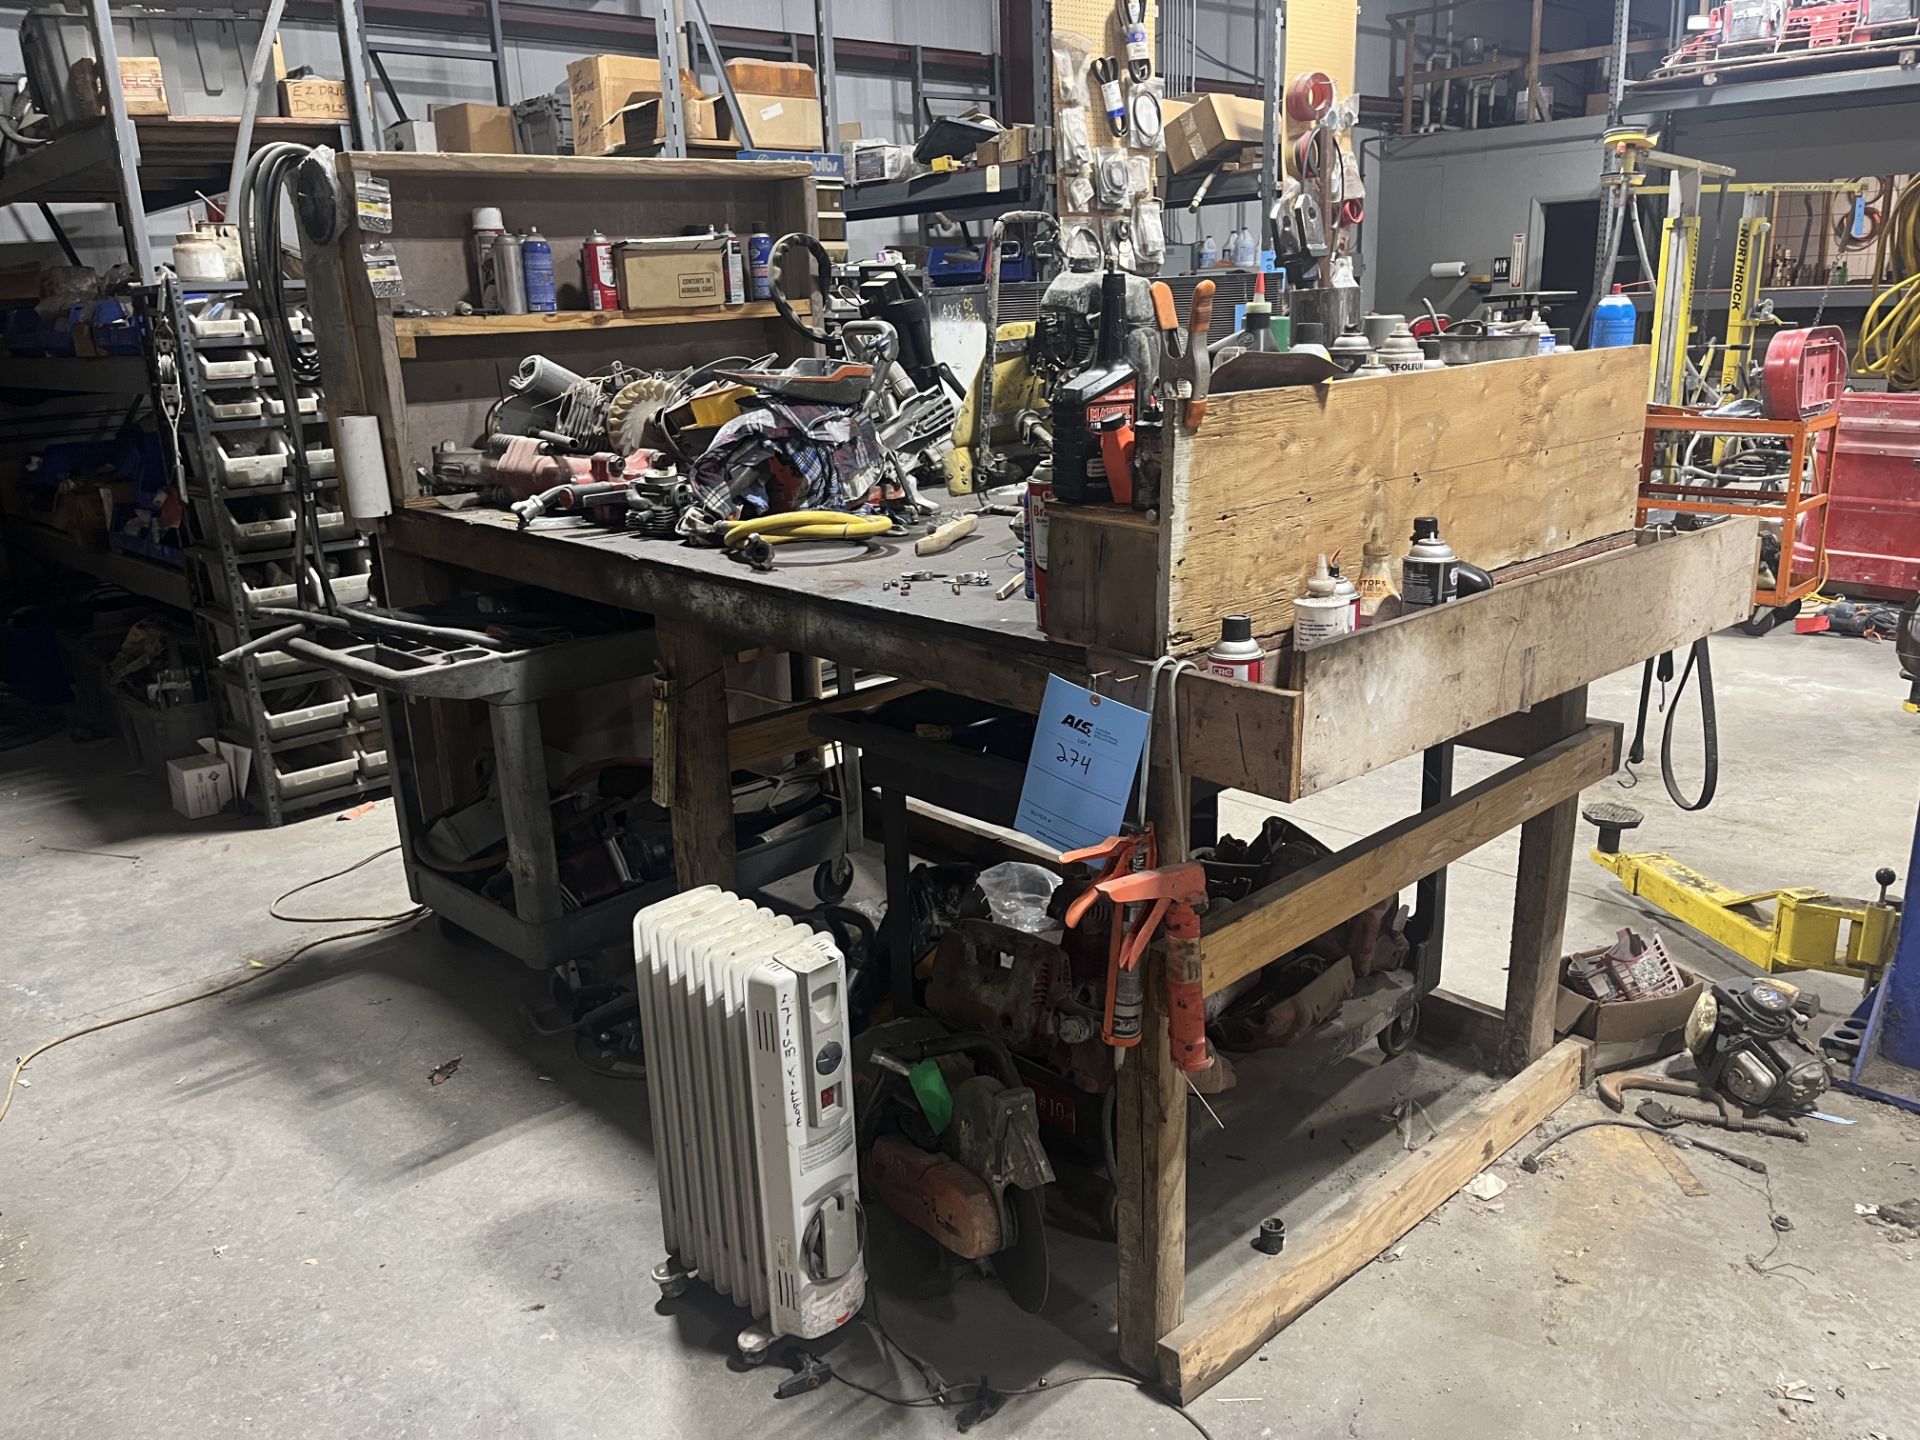 Lot: Table With Contents Including Assorted Saws, Mobile Crimp, Tools, & Misc. Pieces